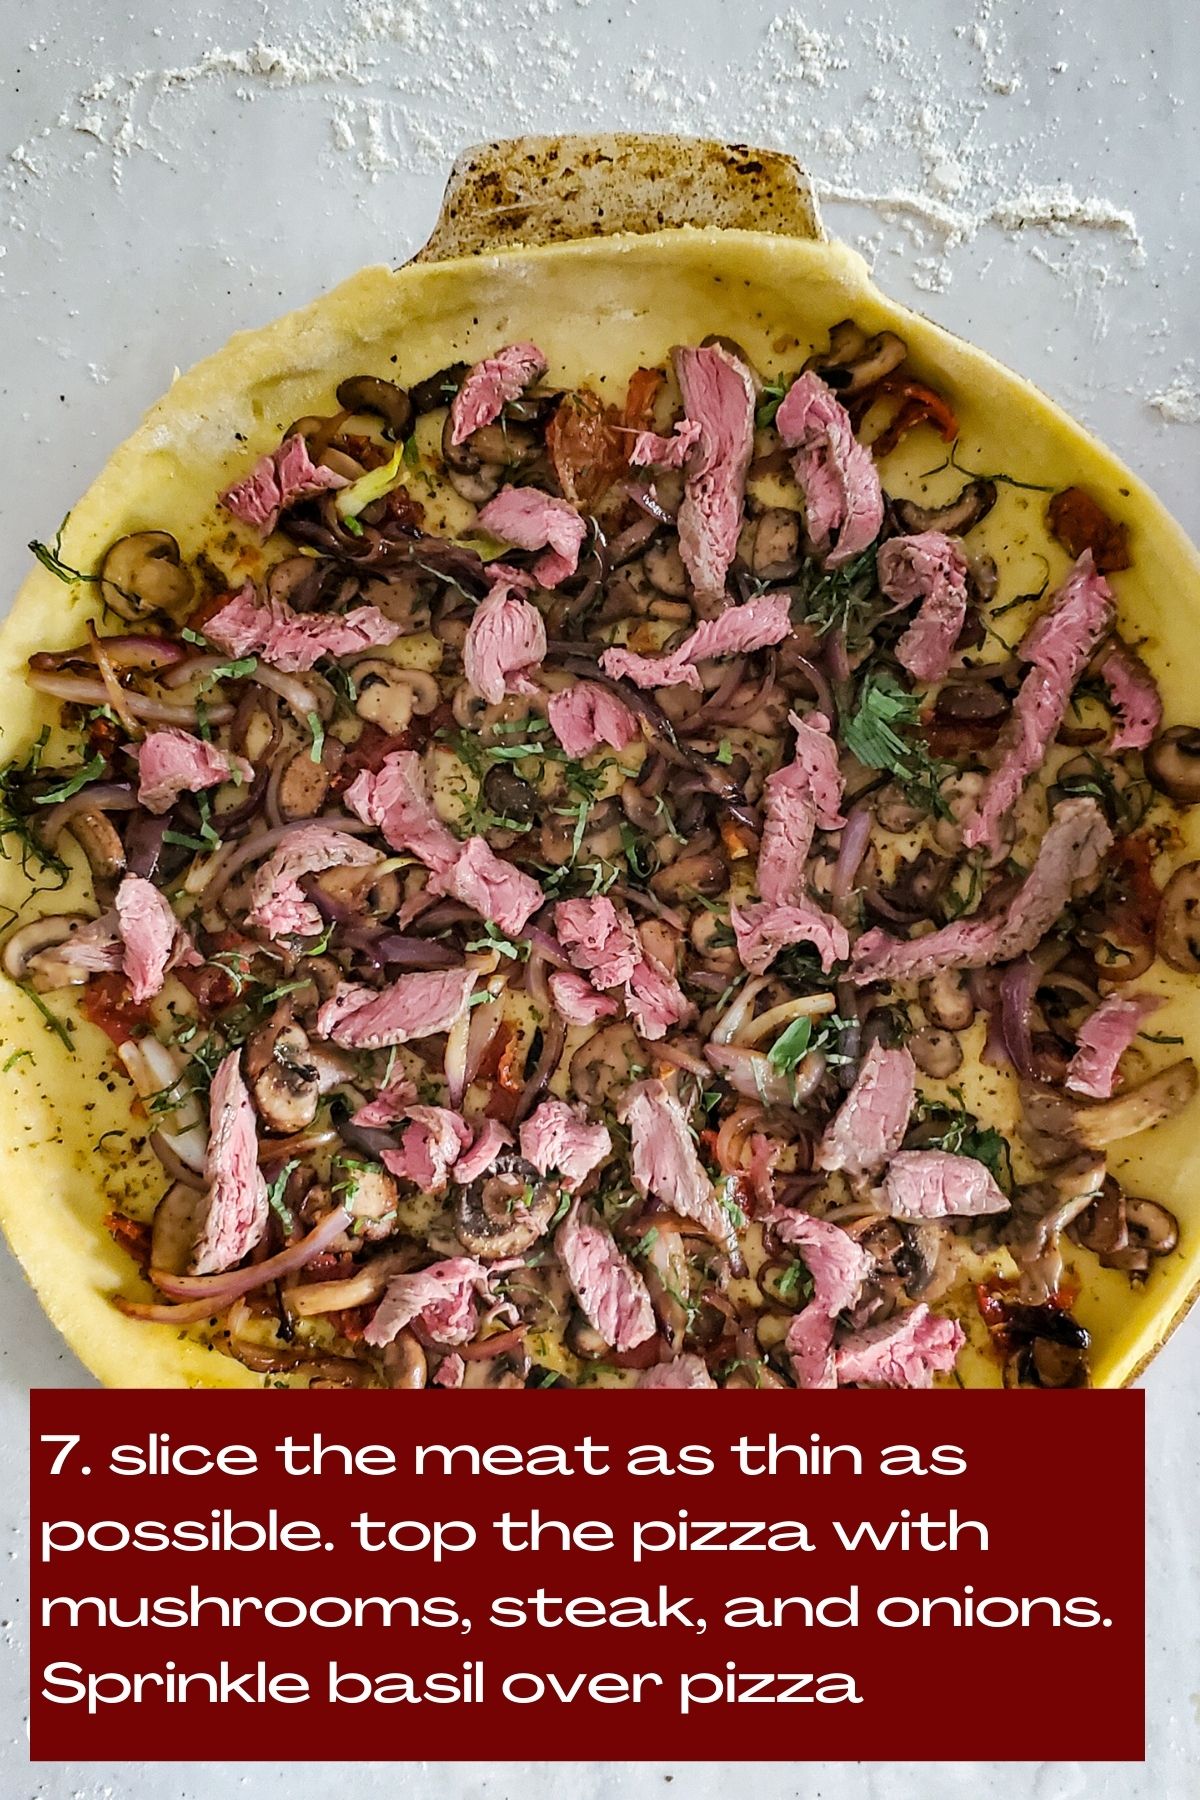 Pizzza dough topped with sautéed mushrooms, caramelized onions and strips of steak